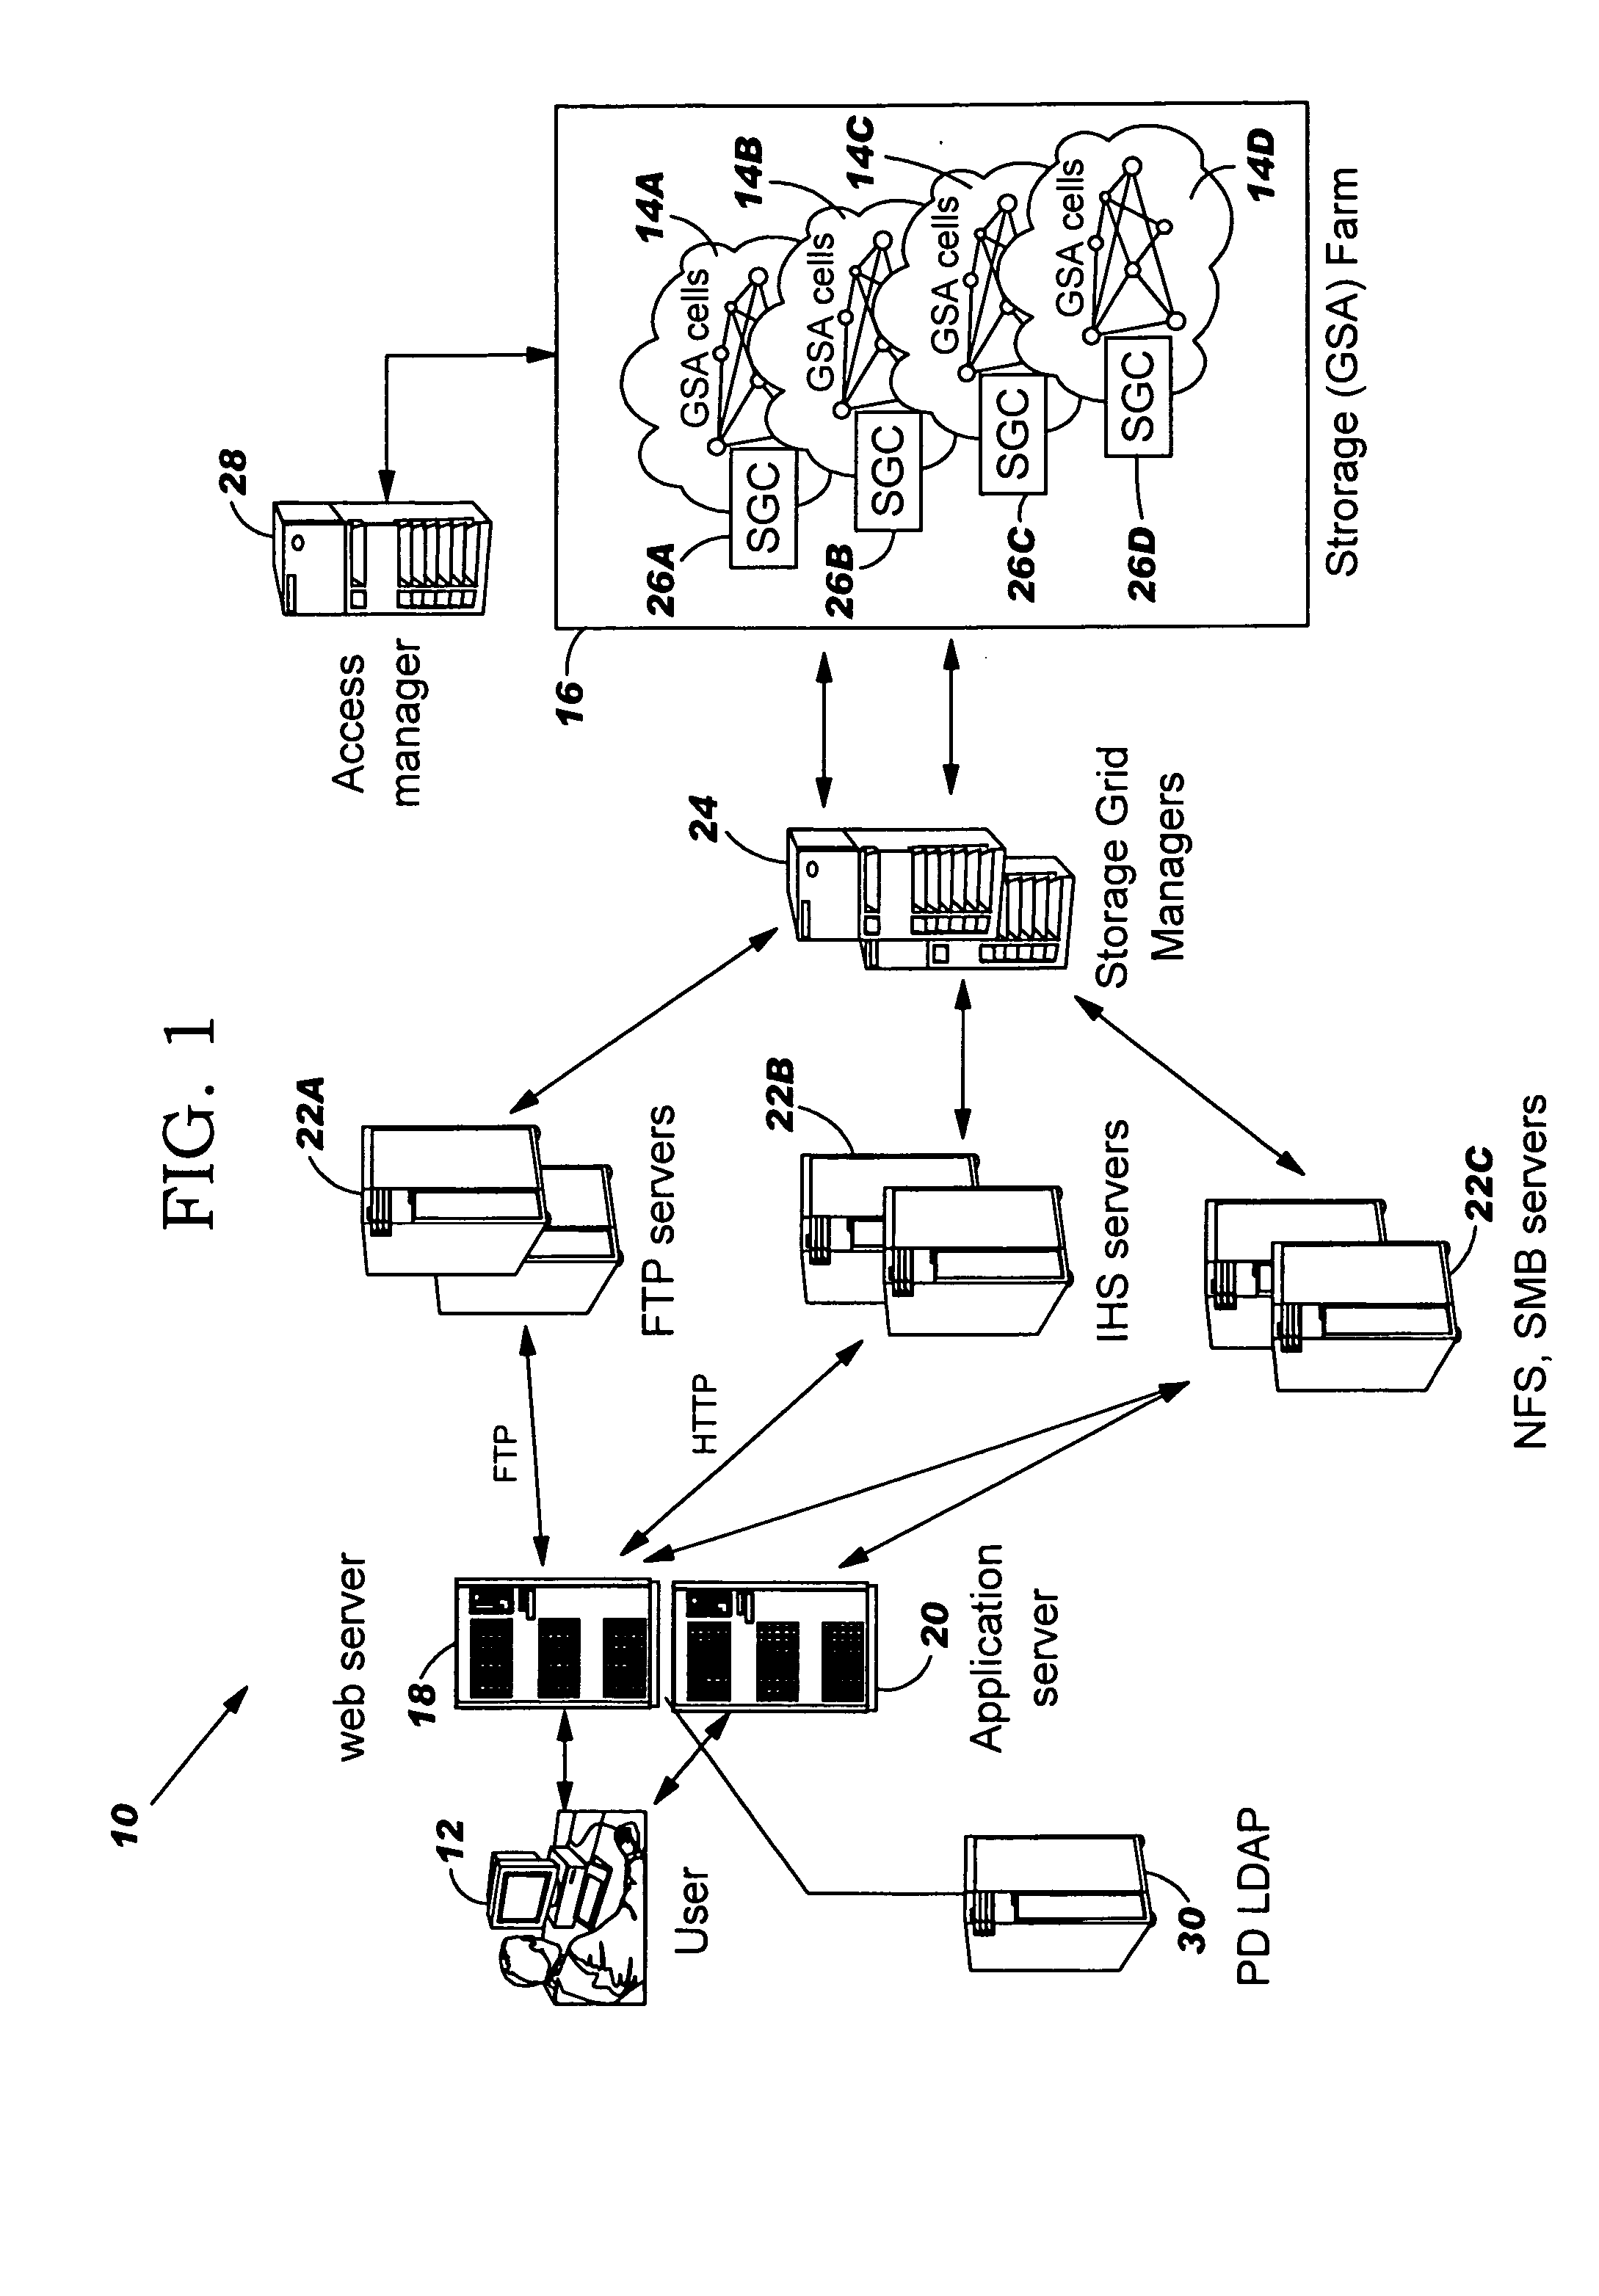 Computerized system, method and program product for managing an enterprise storage system